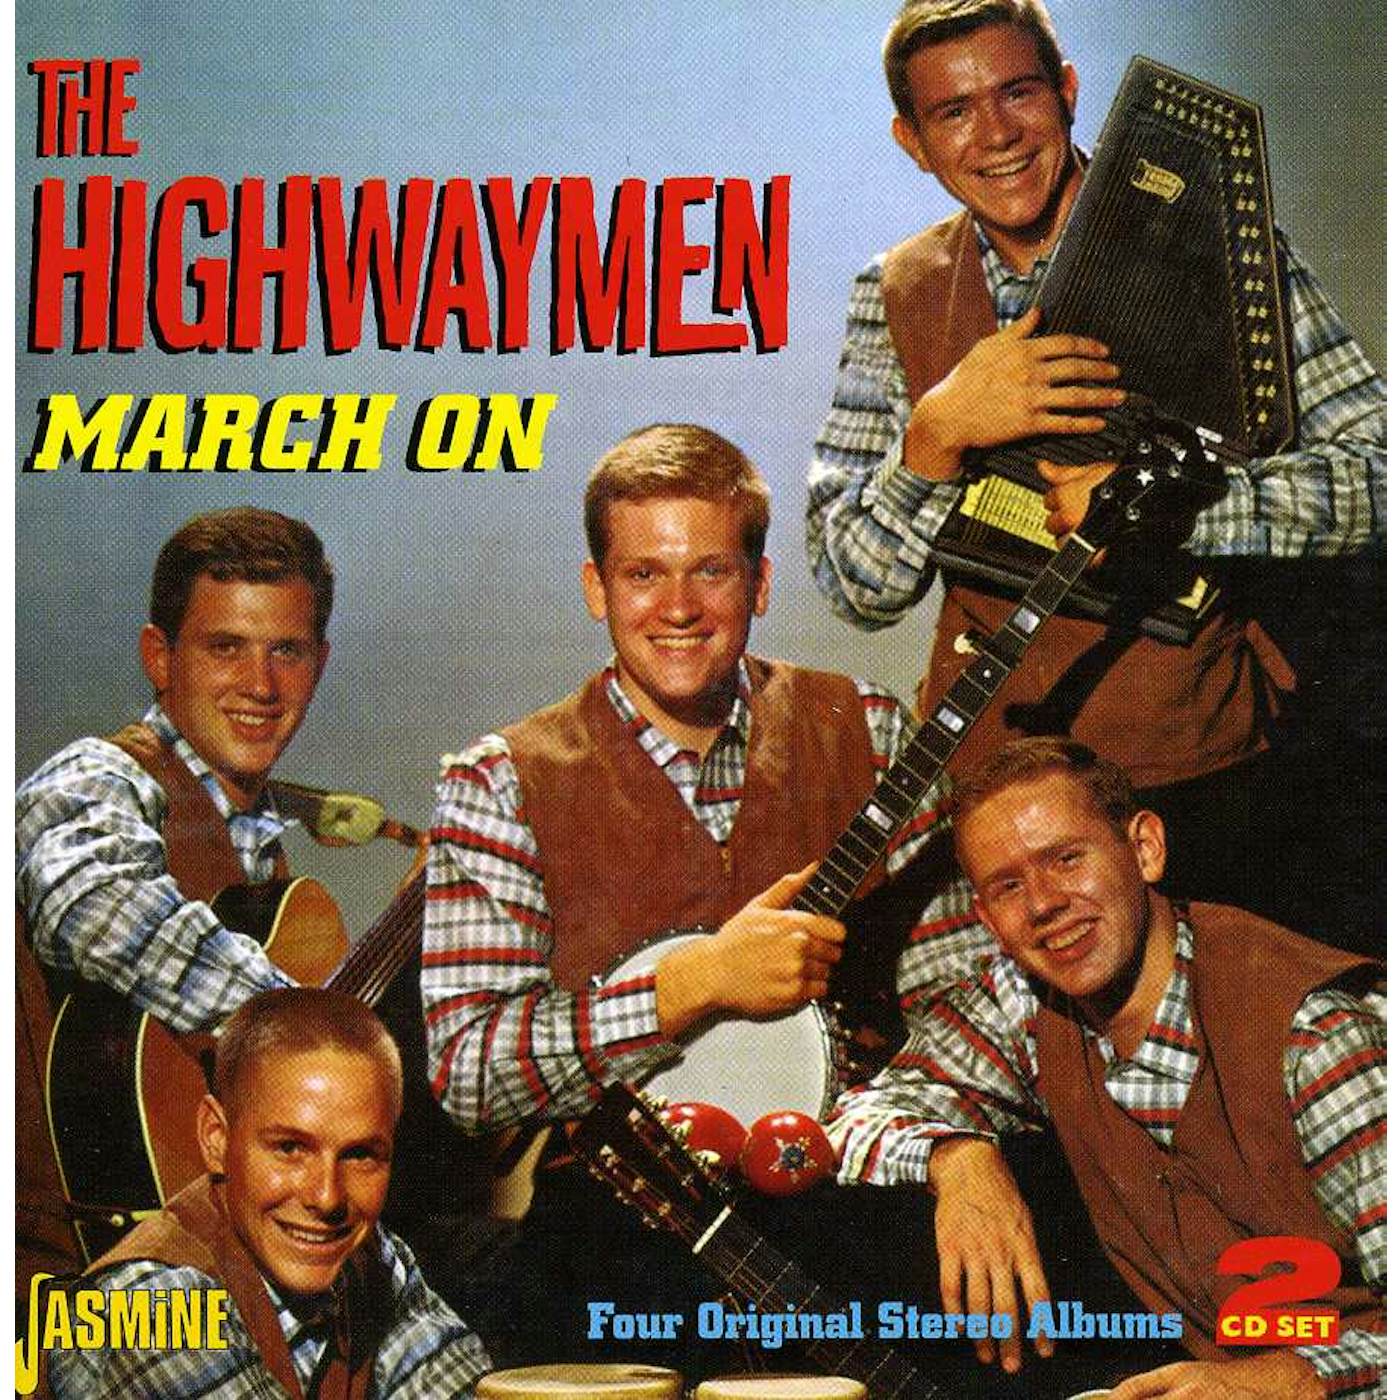 The Highwaymen MARCH ON CD